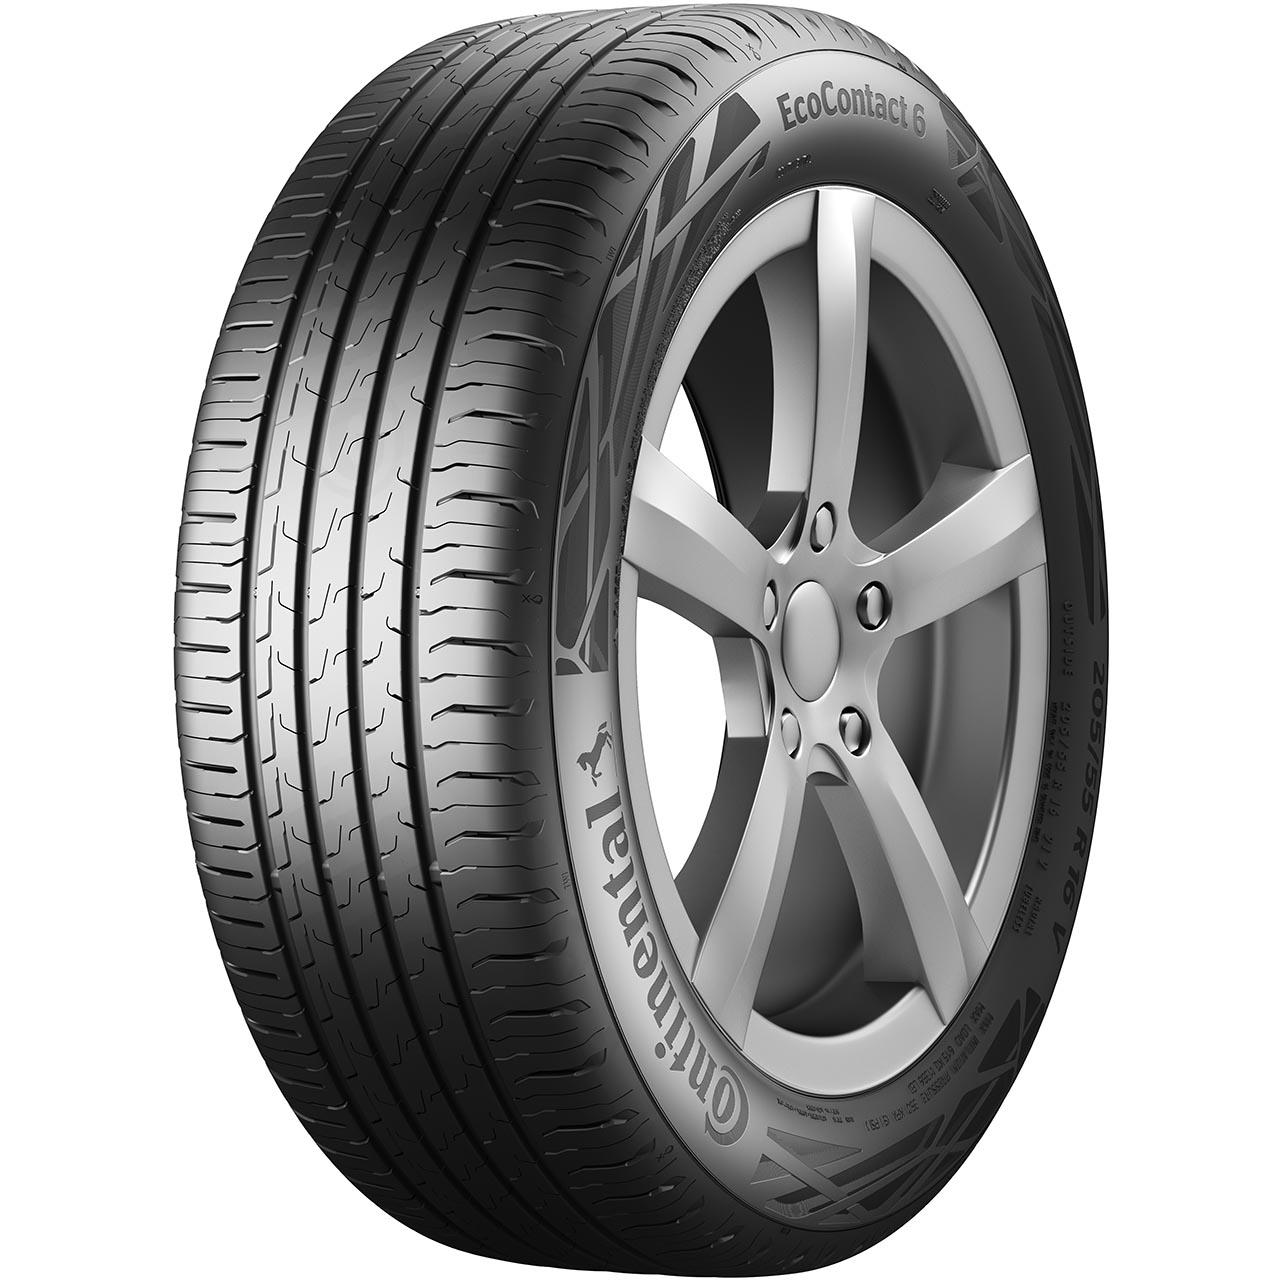 Continental ECOCONTACT 6 235/45R18 94W SEAL VW